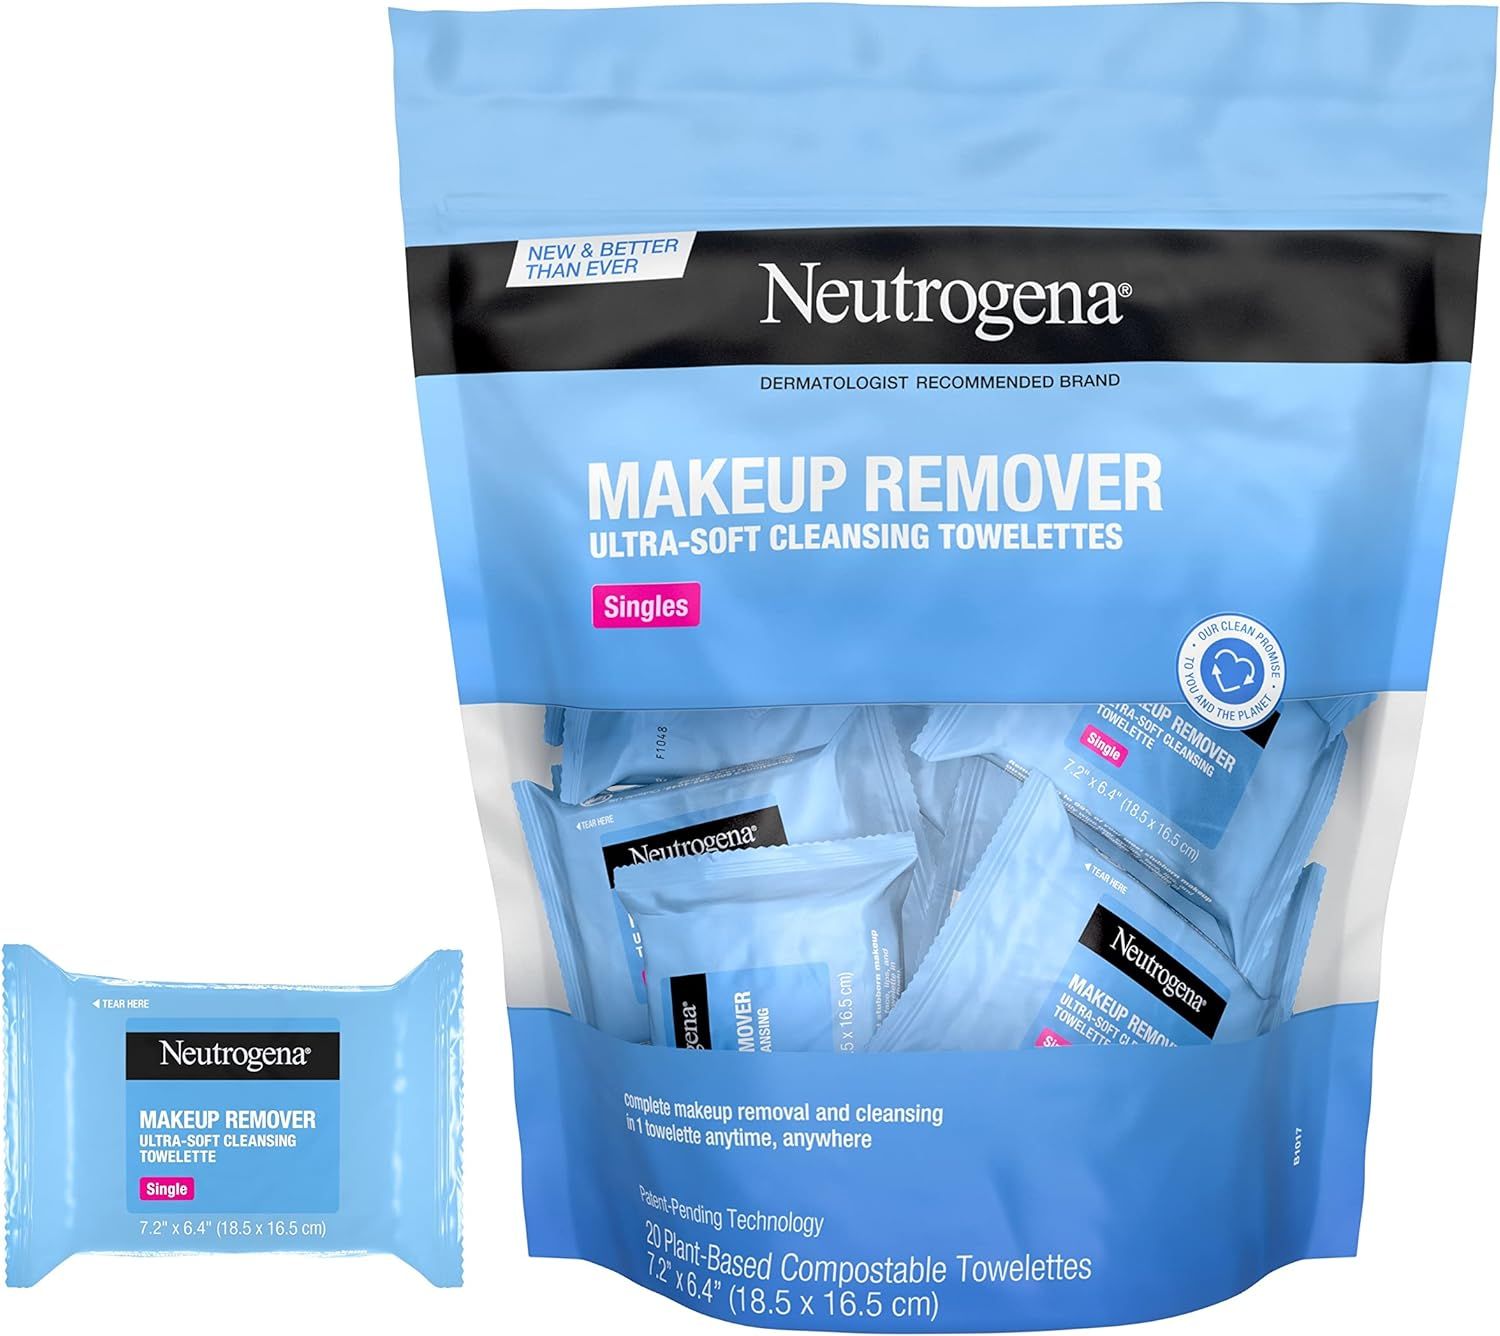 Neutrogena Makeup Remover Facial Cleansing Towelette Singles, Daily Face Wipes Remove Dirt, Oil, Mak | Amazon (US)